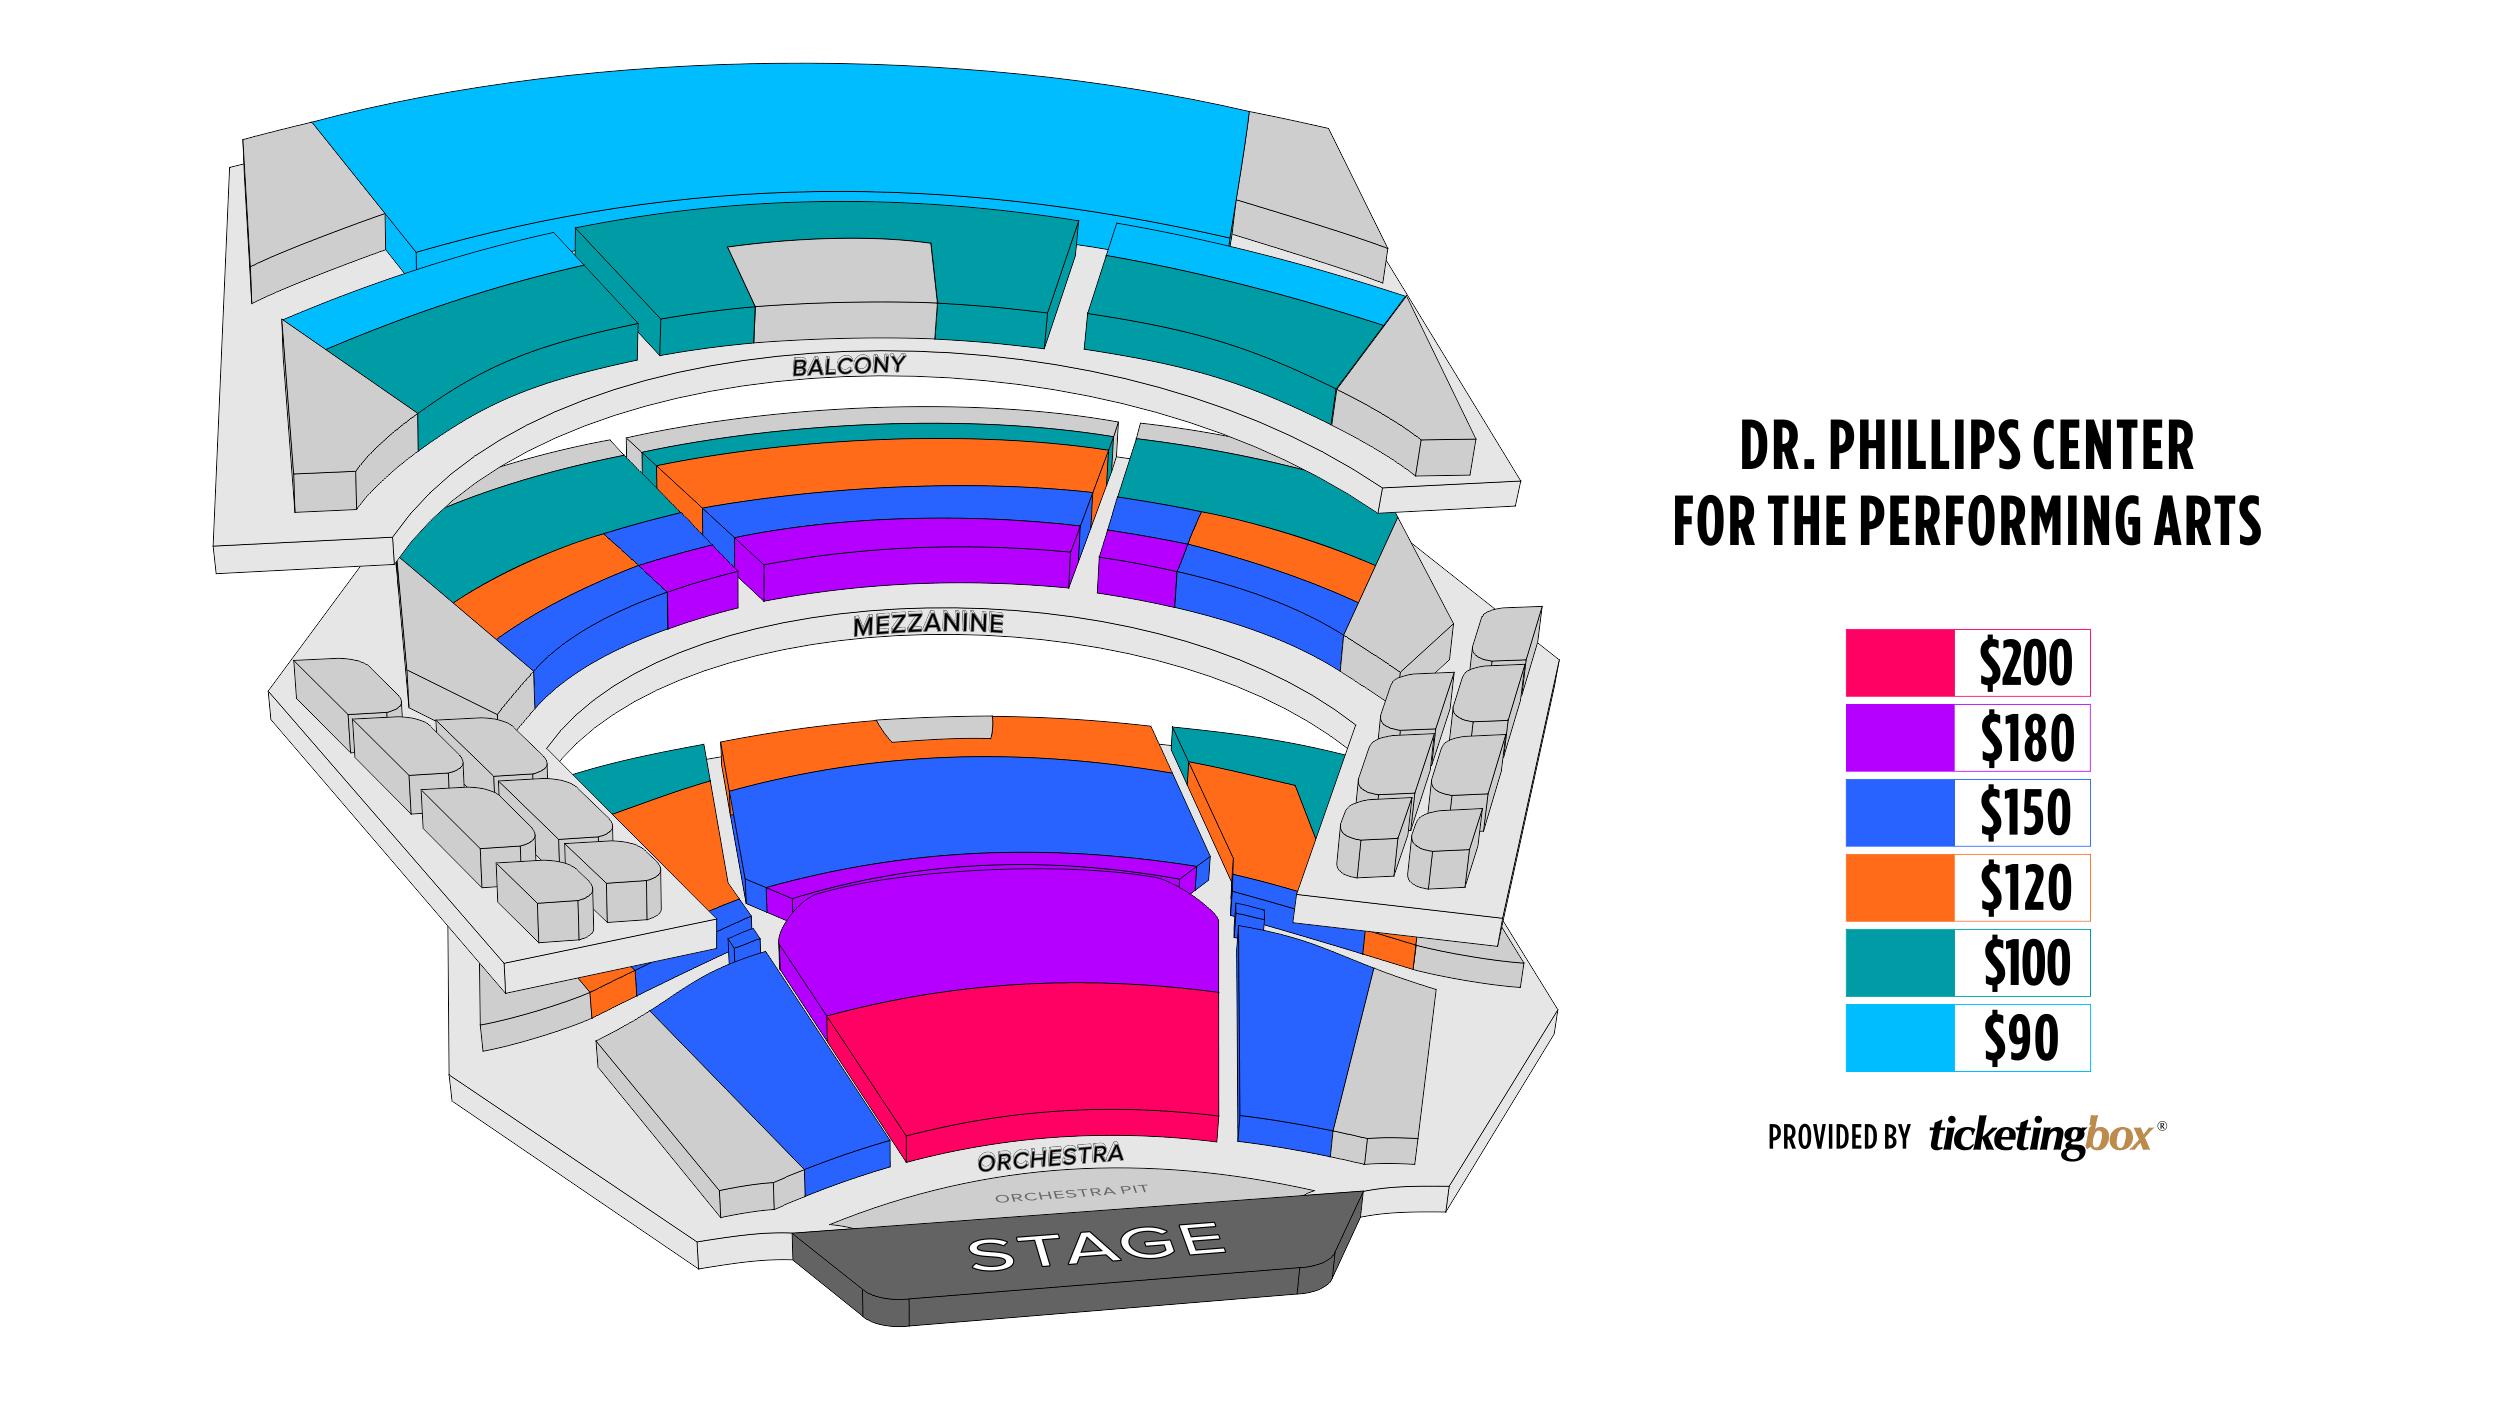 Orlando Dr Phillips Center For The Performing Arts Seating Chart